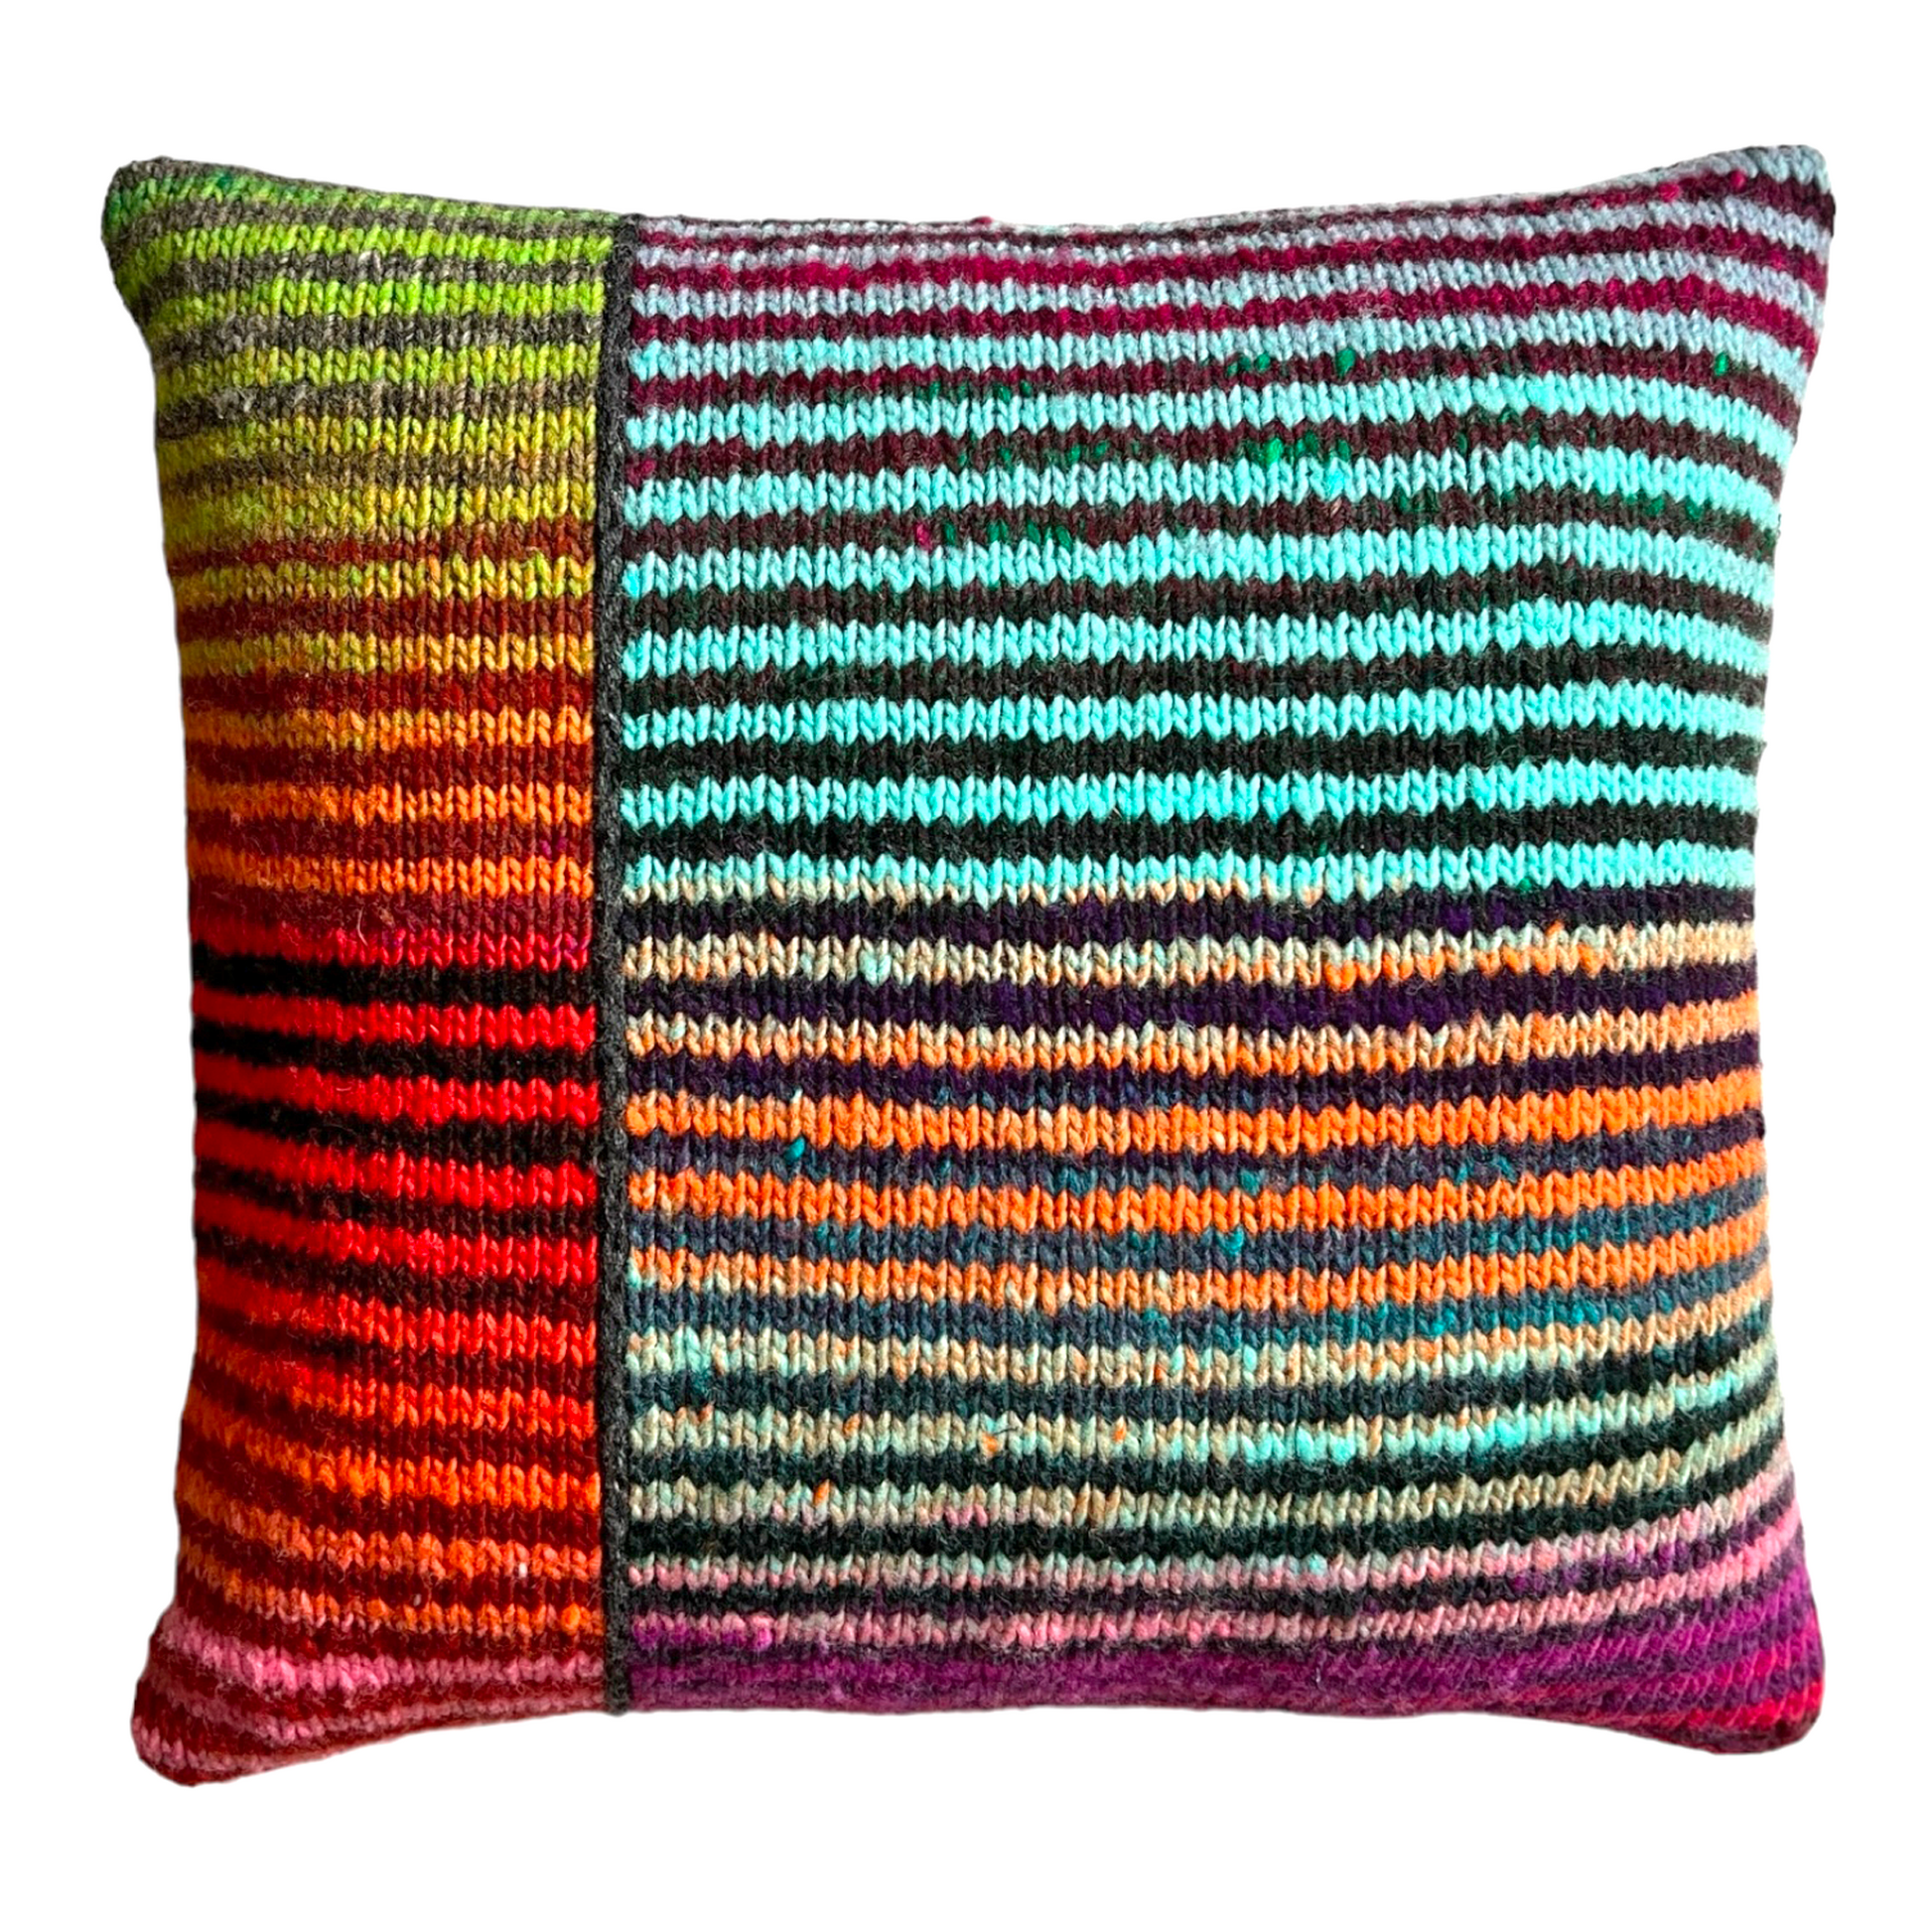 100% wool throw pillow, hand-knit in two sections of alternating, variegated stripes in a rainbow of bright colors.